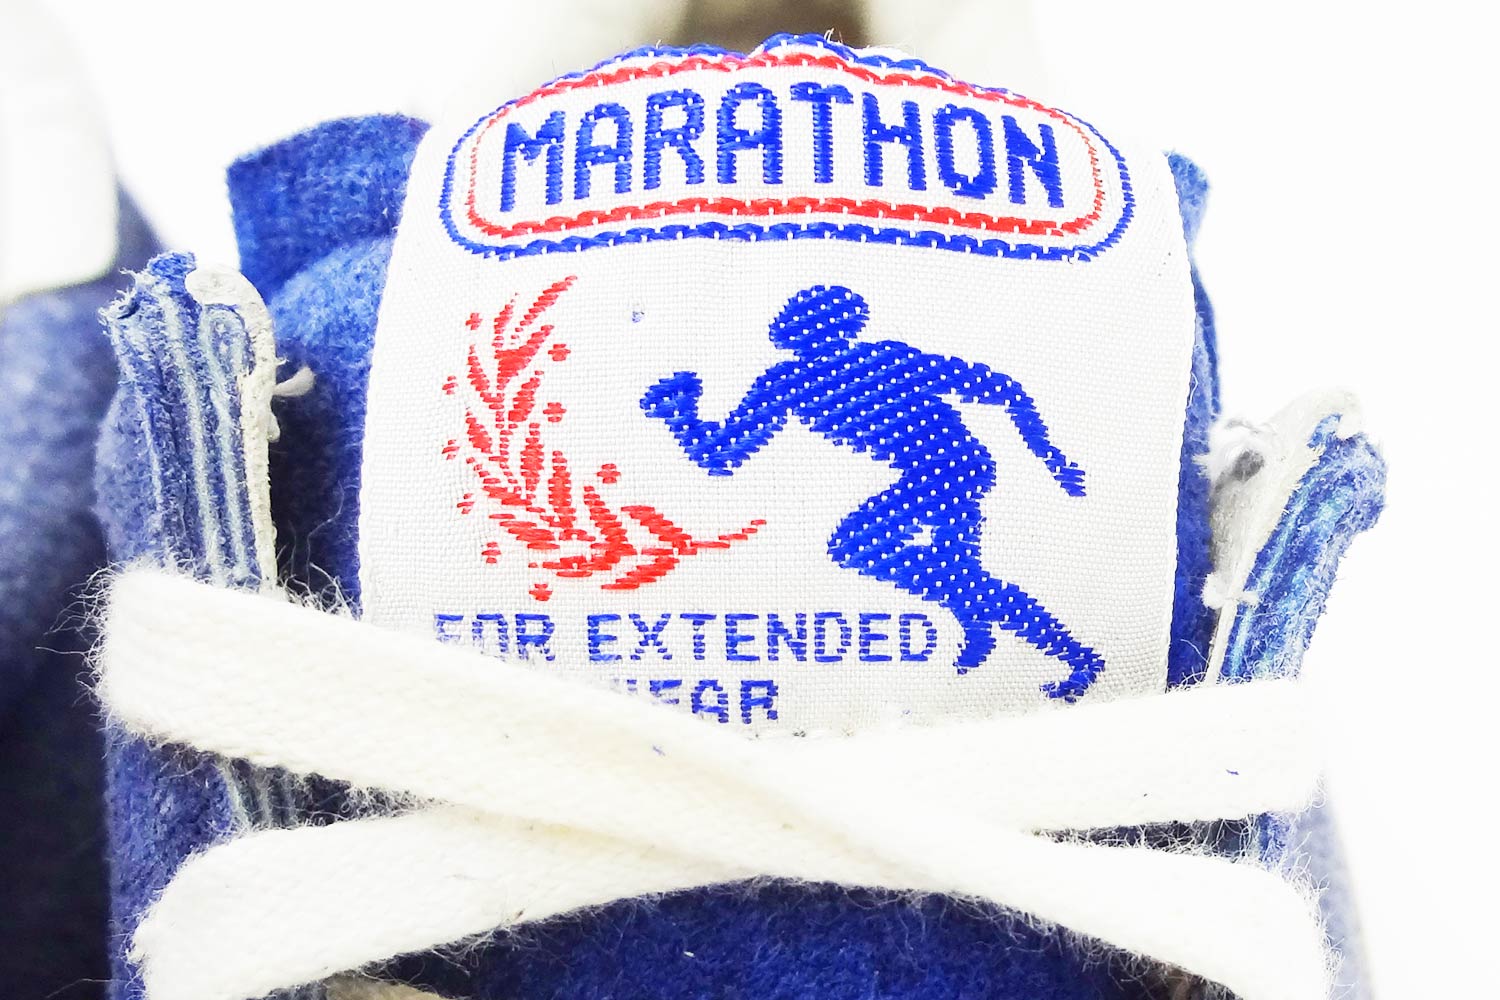 Marathon brand 70s 80s vintage sneakers "For extended wear"  label detail @ The Deffest